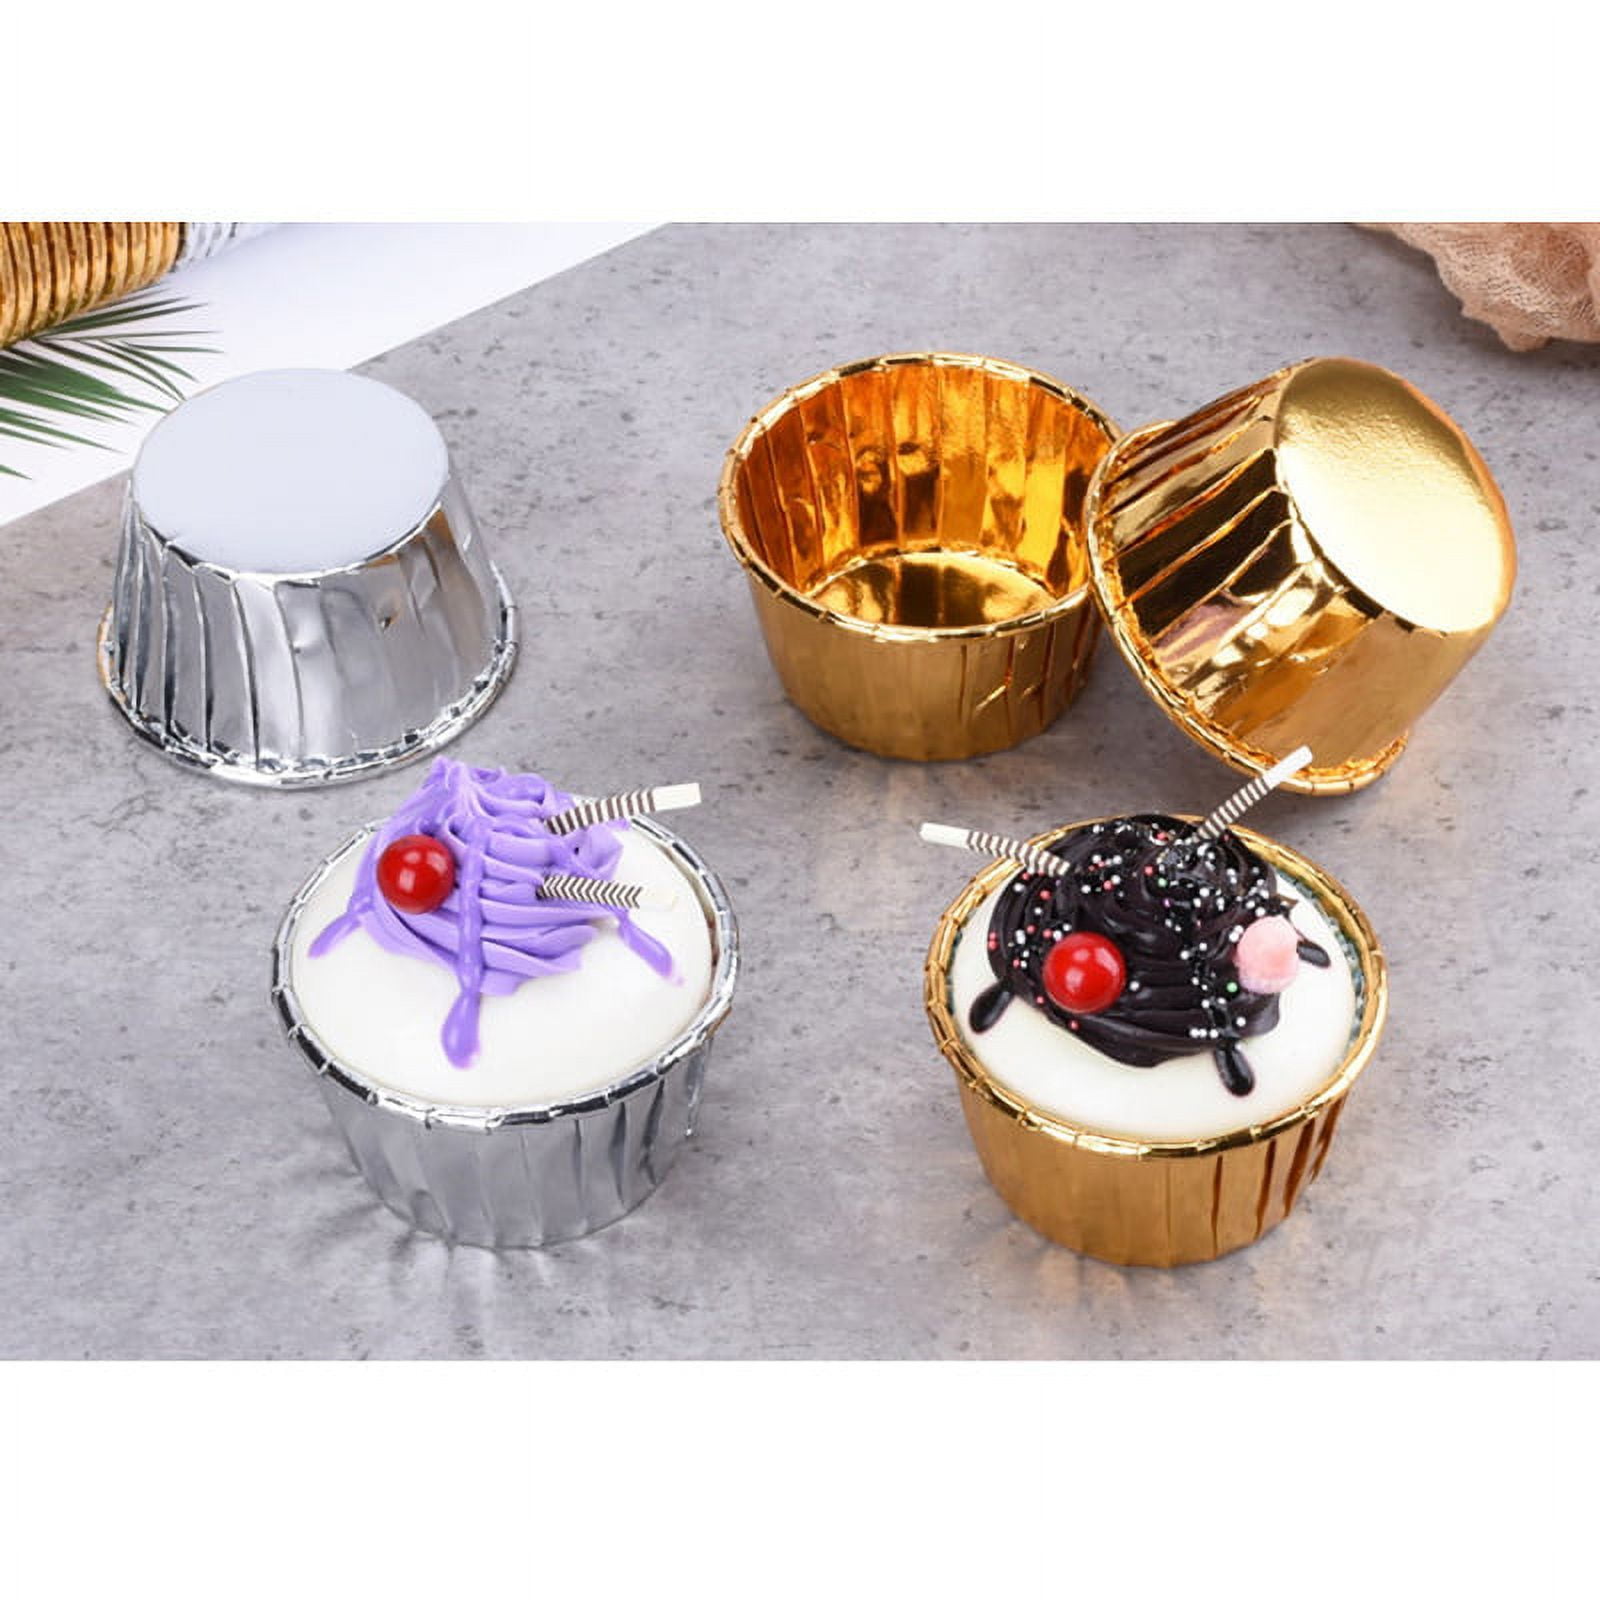 STANDARD Foil Cupcake Liners / Baking Cups – 50 ct IVORY – Cake